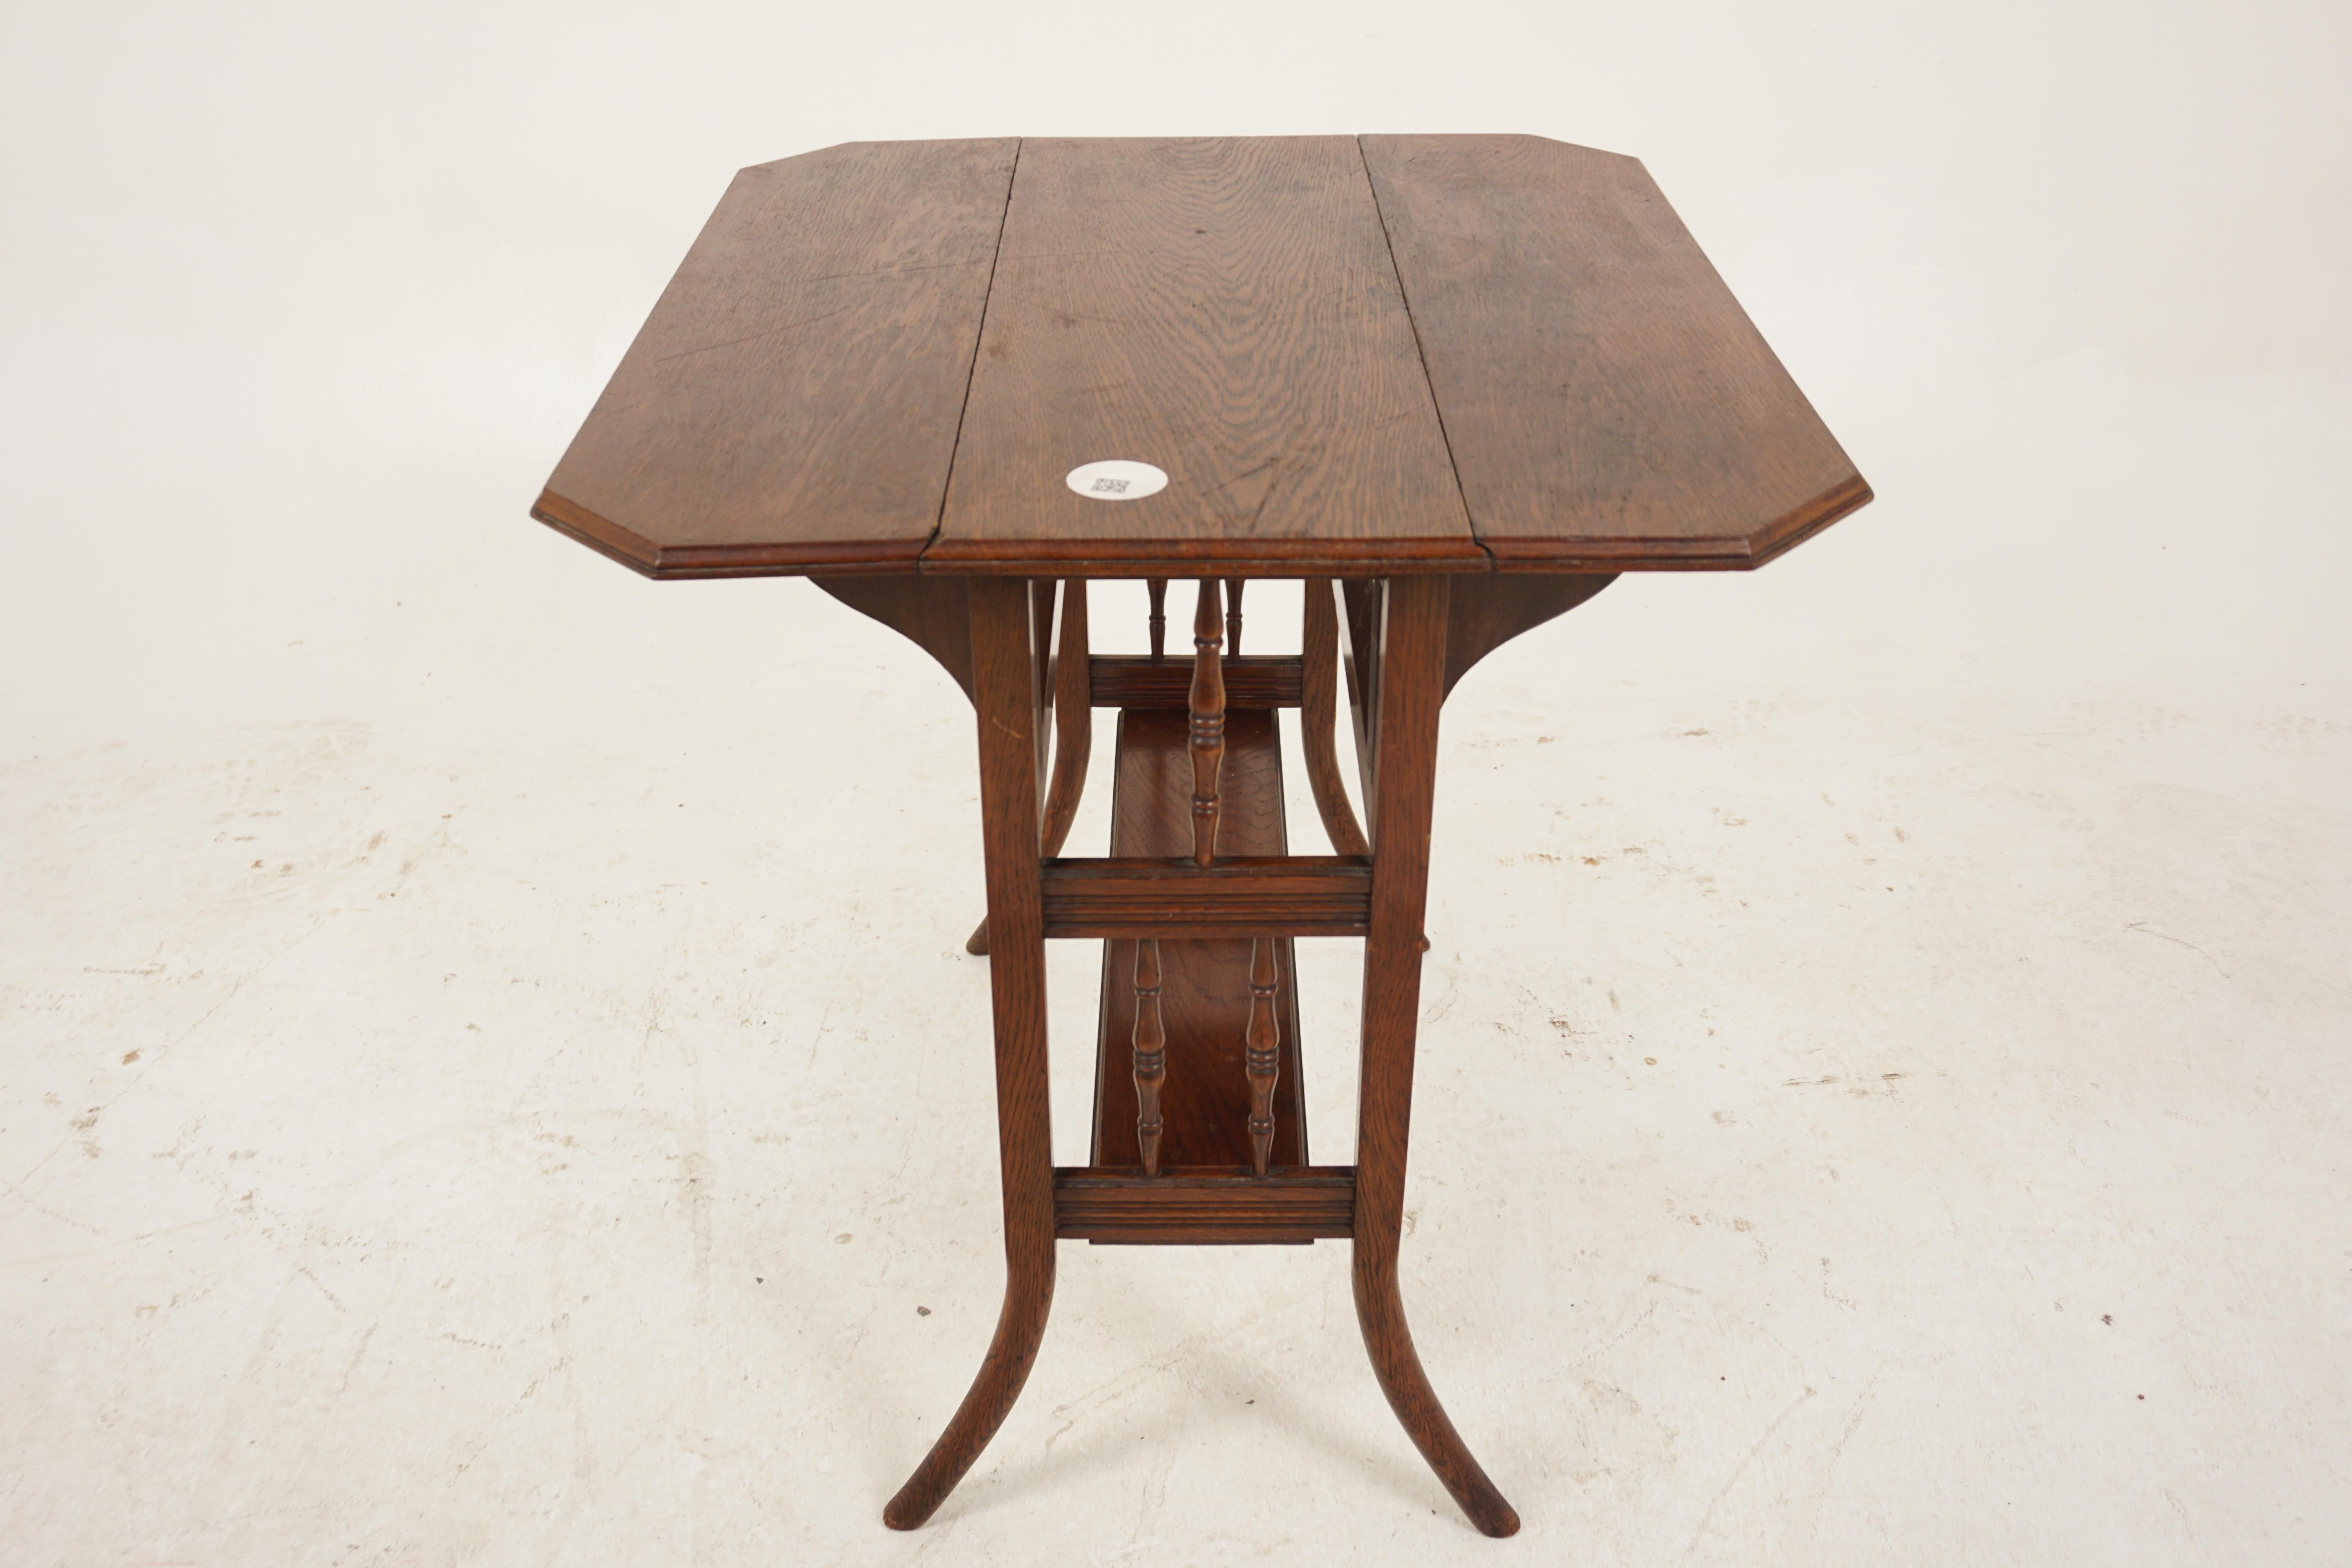 Antique Oak Table, Gateleg Drop Leaf Table with Drawers, Scotland 1890, H1093 For Sale 2